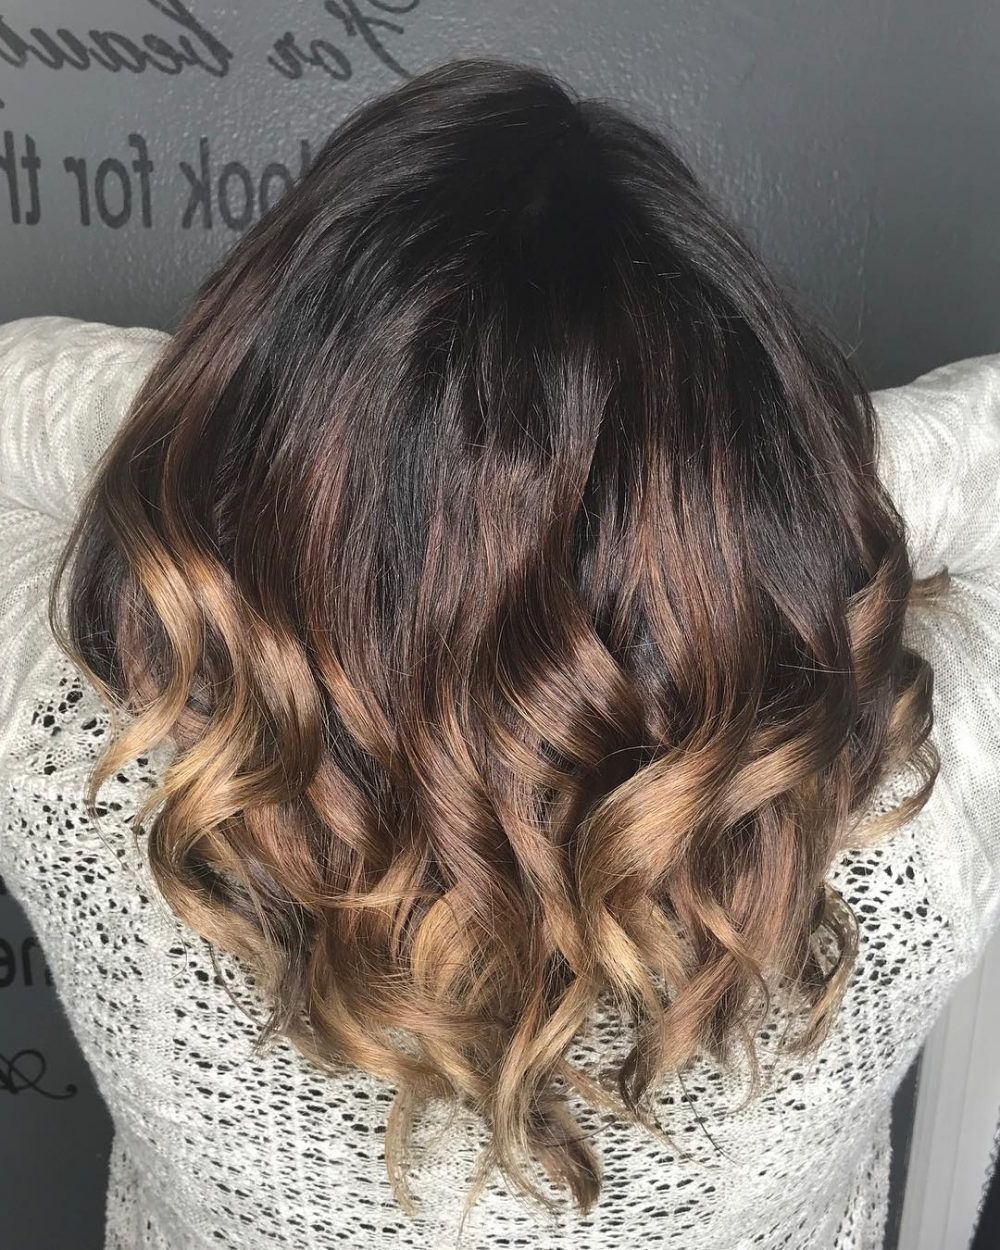 36 Top Short Ombre Hair Ideas Of 2018 With Regard To Short Curly Caramel Brown Bob Hairstyles (View 16 of 25)